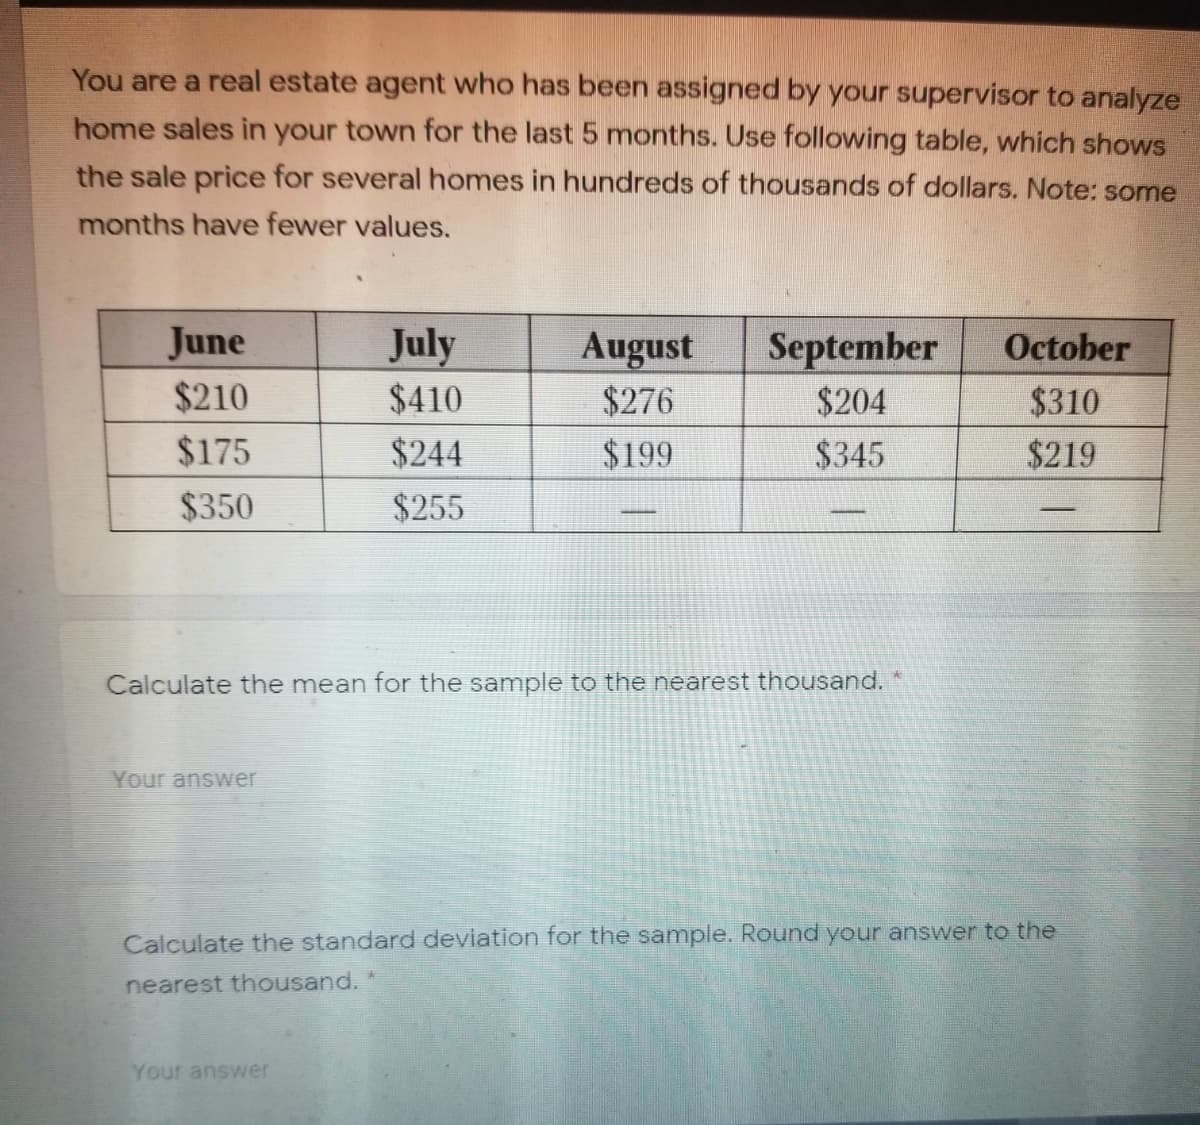 You are a real estate agent who has been assigned by your supervisor to analyze
home sales in your town for the last 5 months. Use following table, which shows
the sale price for several homes in hundreds of thousands of dollars. Note: some
months have fewer values.
June
July
$410
September
$204
August
October
$210
$276
$310
$175
$244
$199
$345
$219
$350
$255
Calculate the mean for the sample to the nearest thousand.
Your answer
Calculate the standard deviation for the sample. Round your answer to the
nearest thousand.
Your answer
